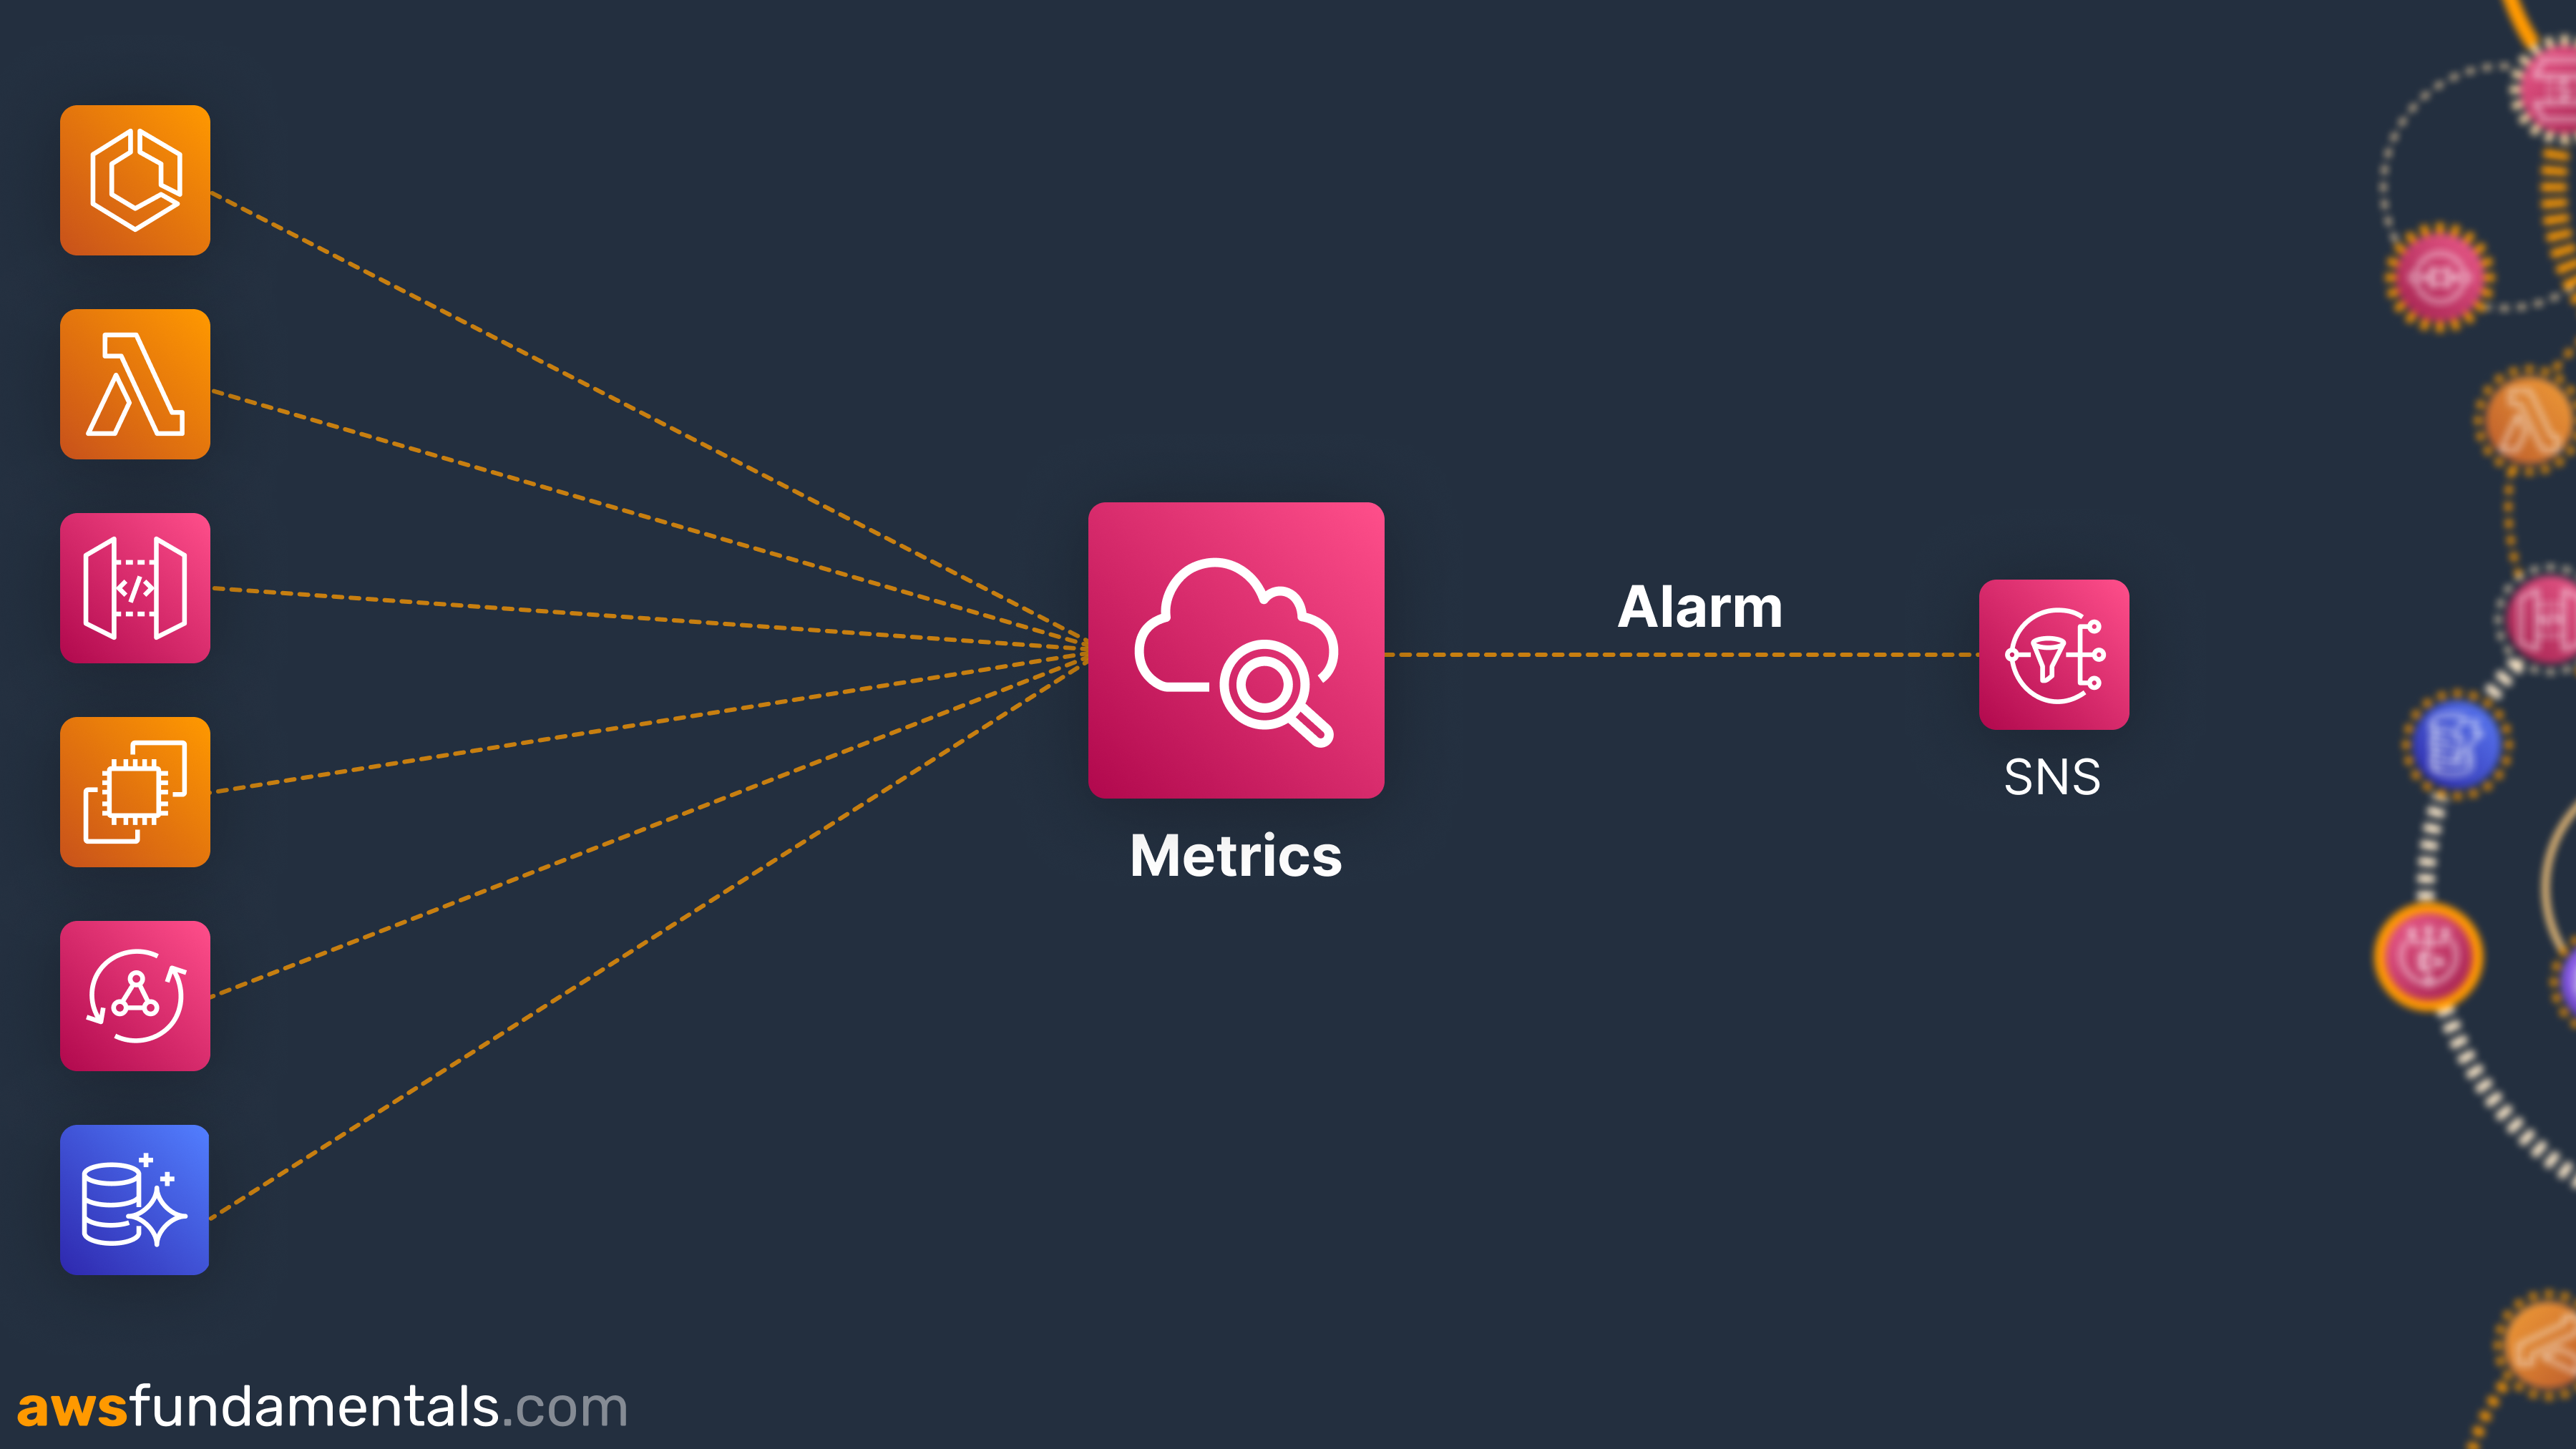 CloudWatch Alarms uses SNS for notifications